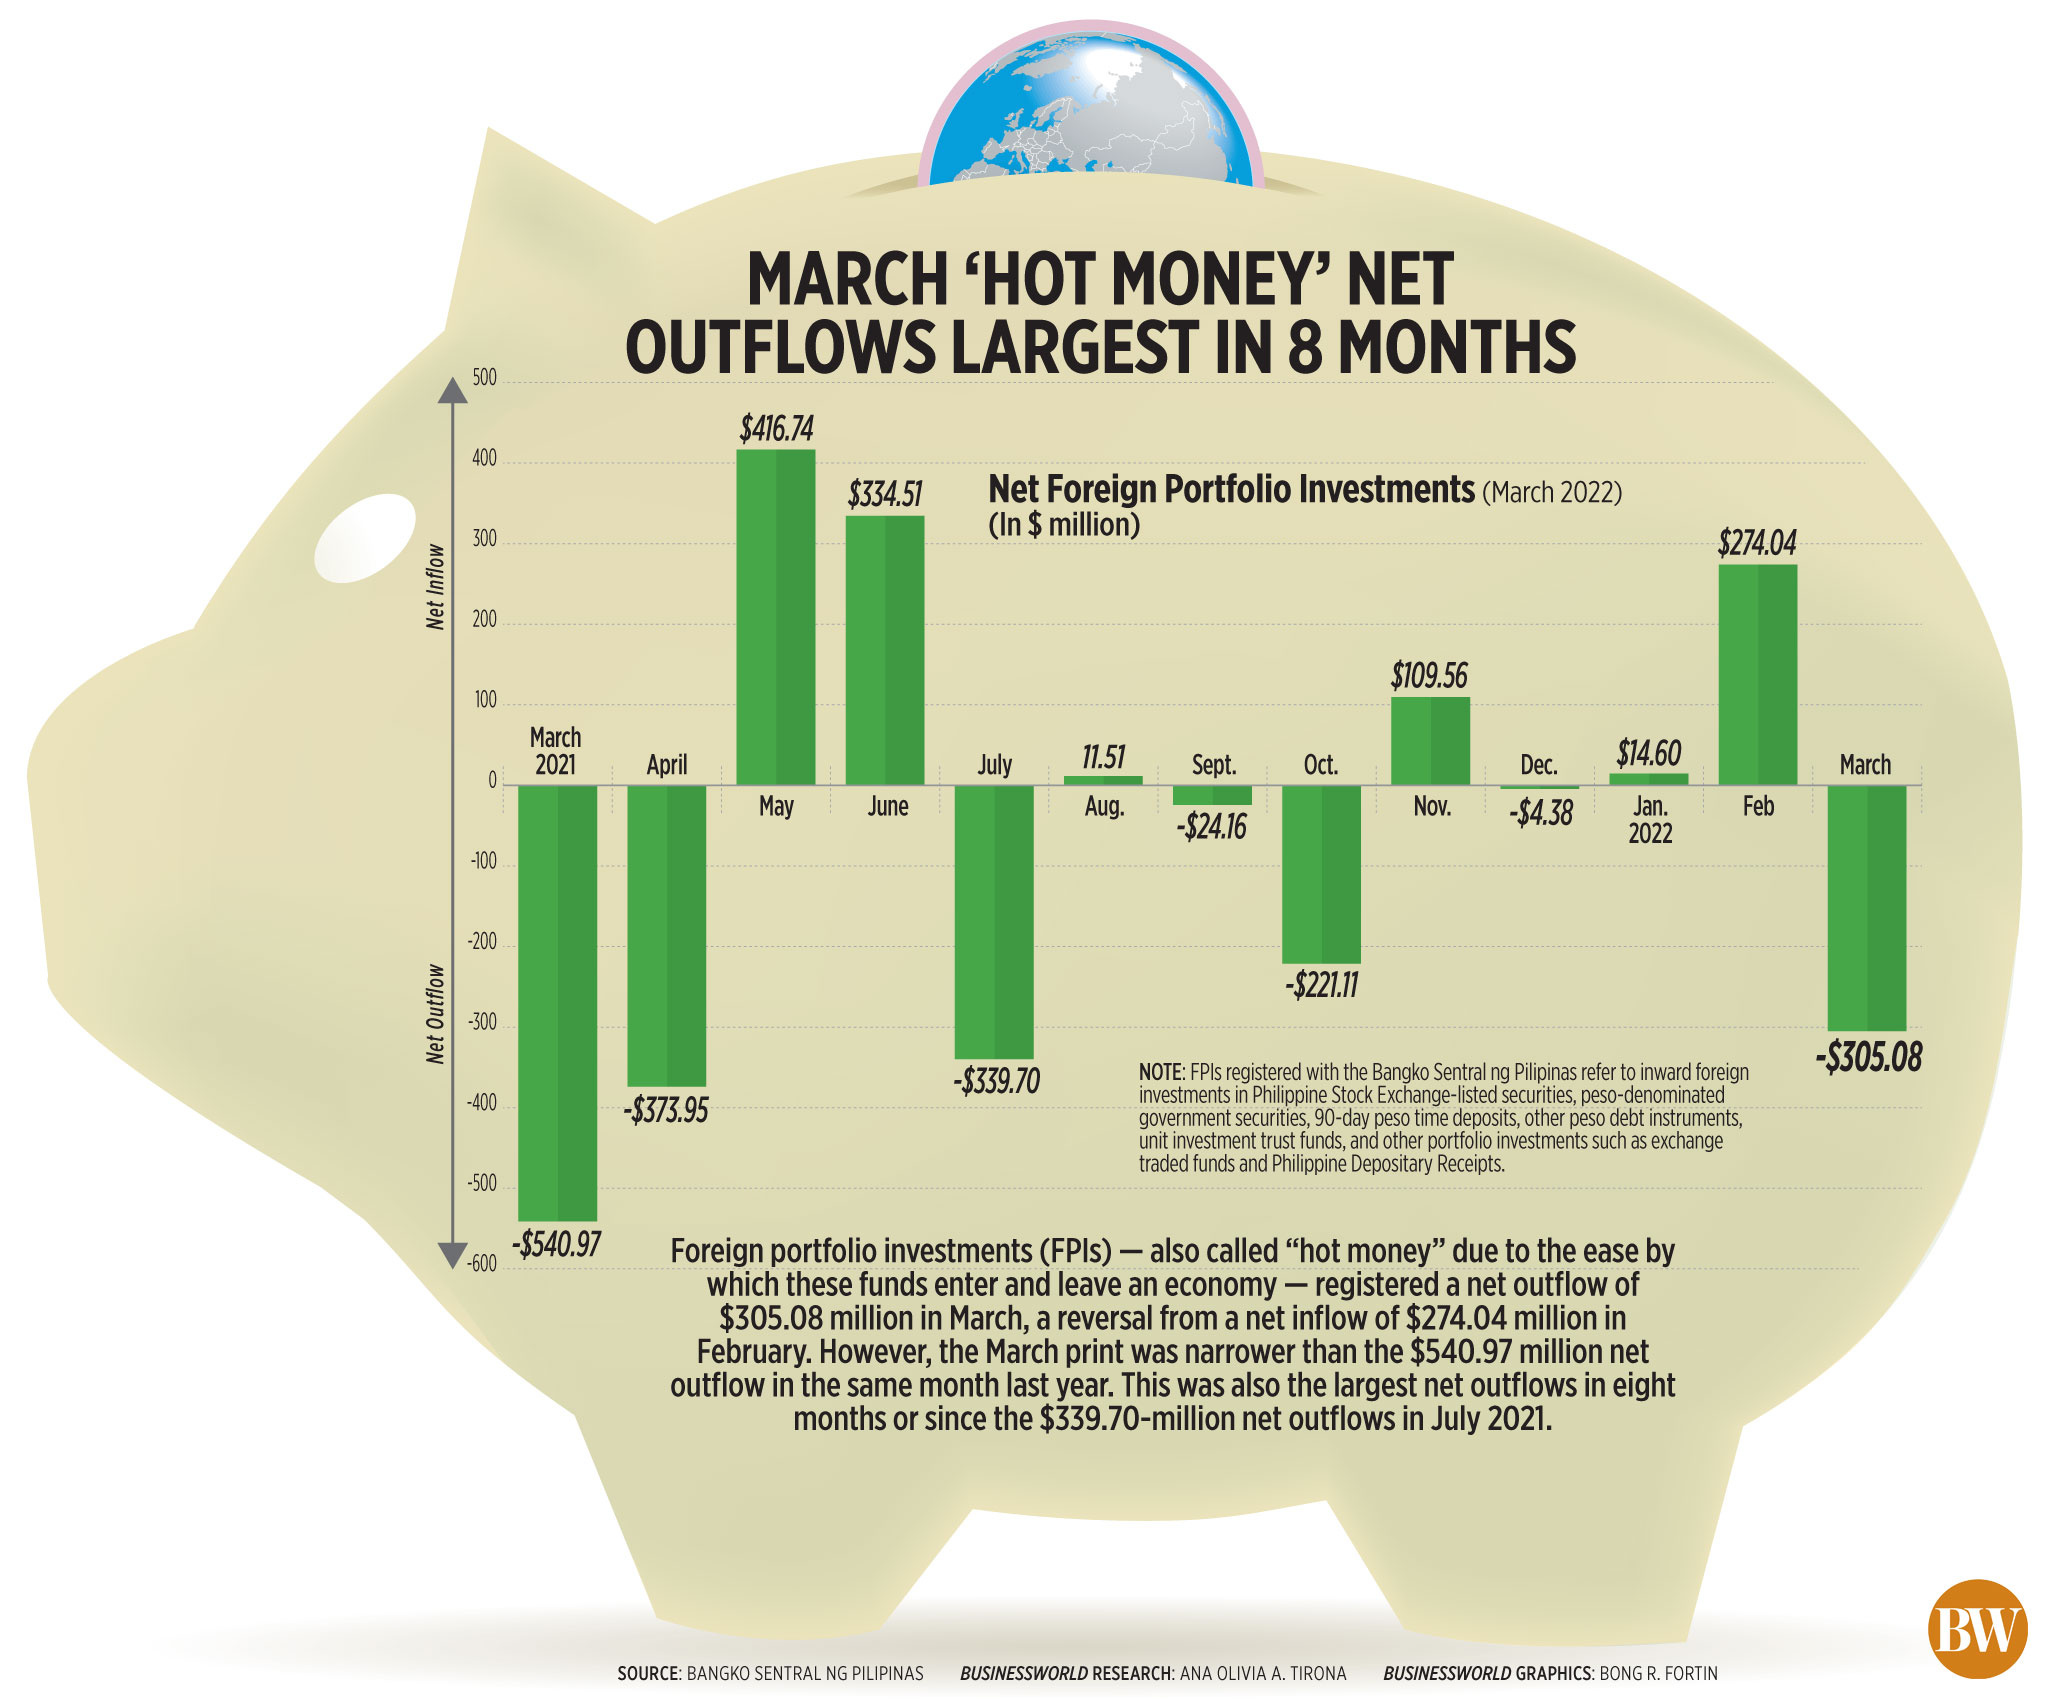 March ‘hot money’ net outflows largest in 8 months